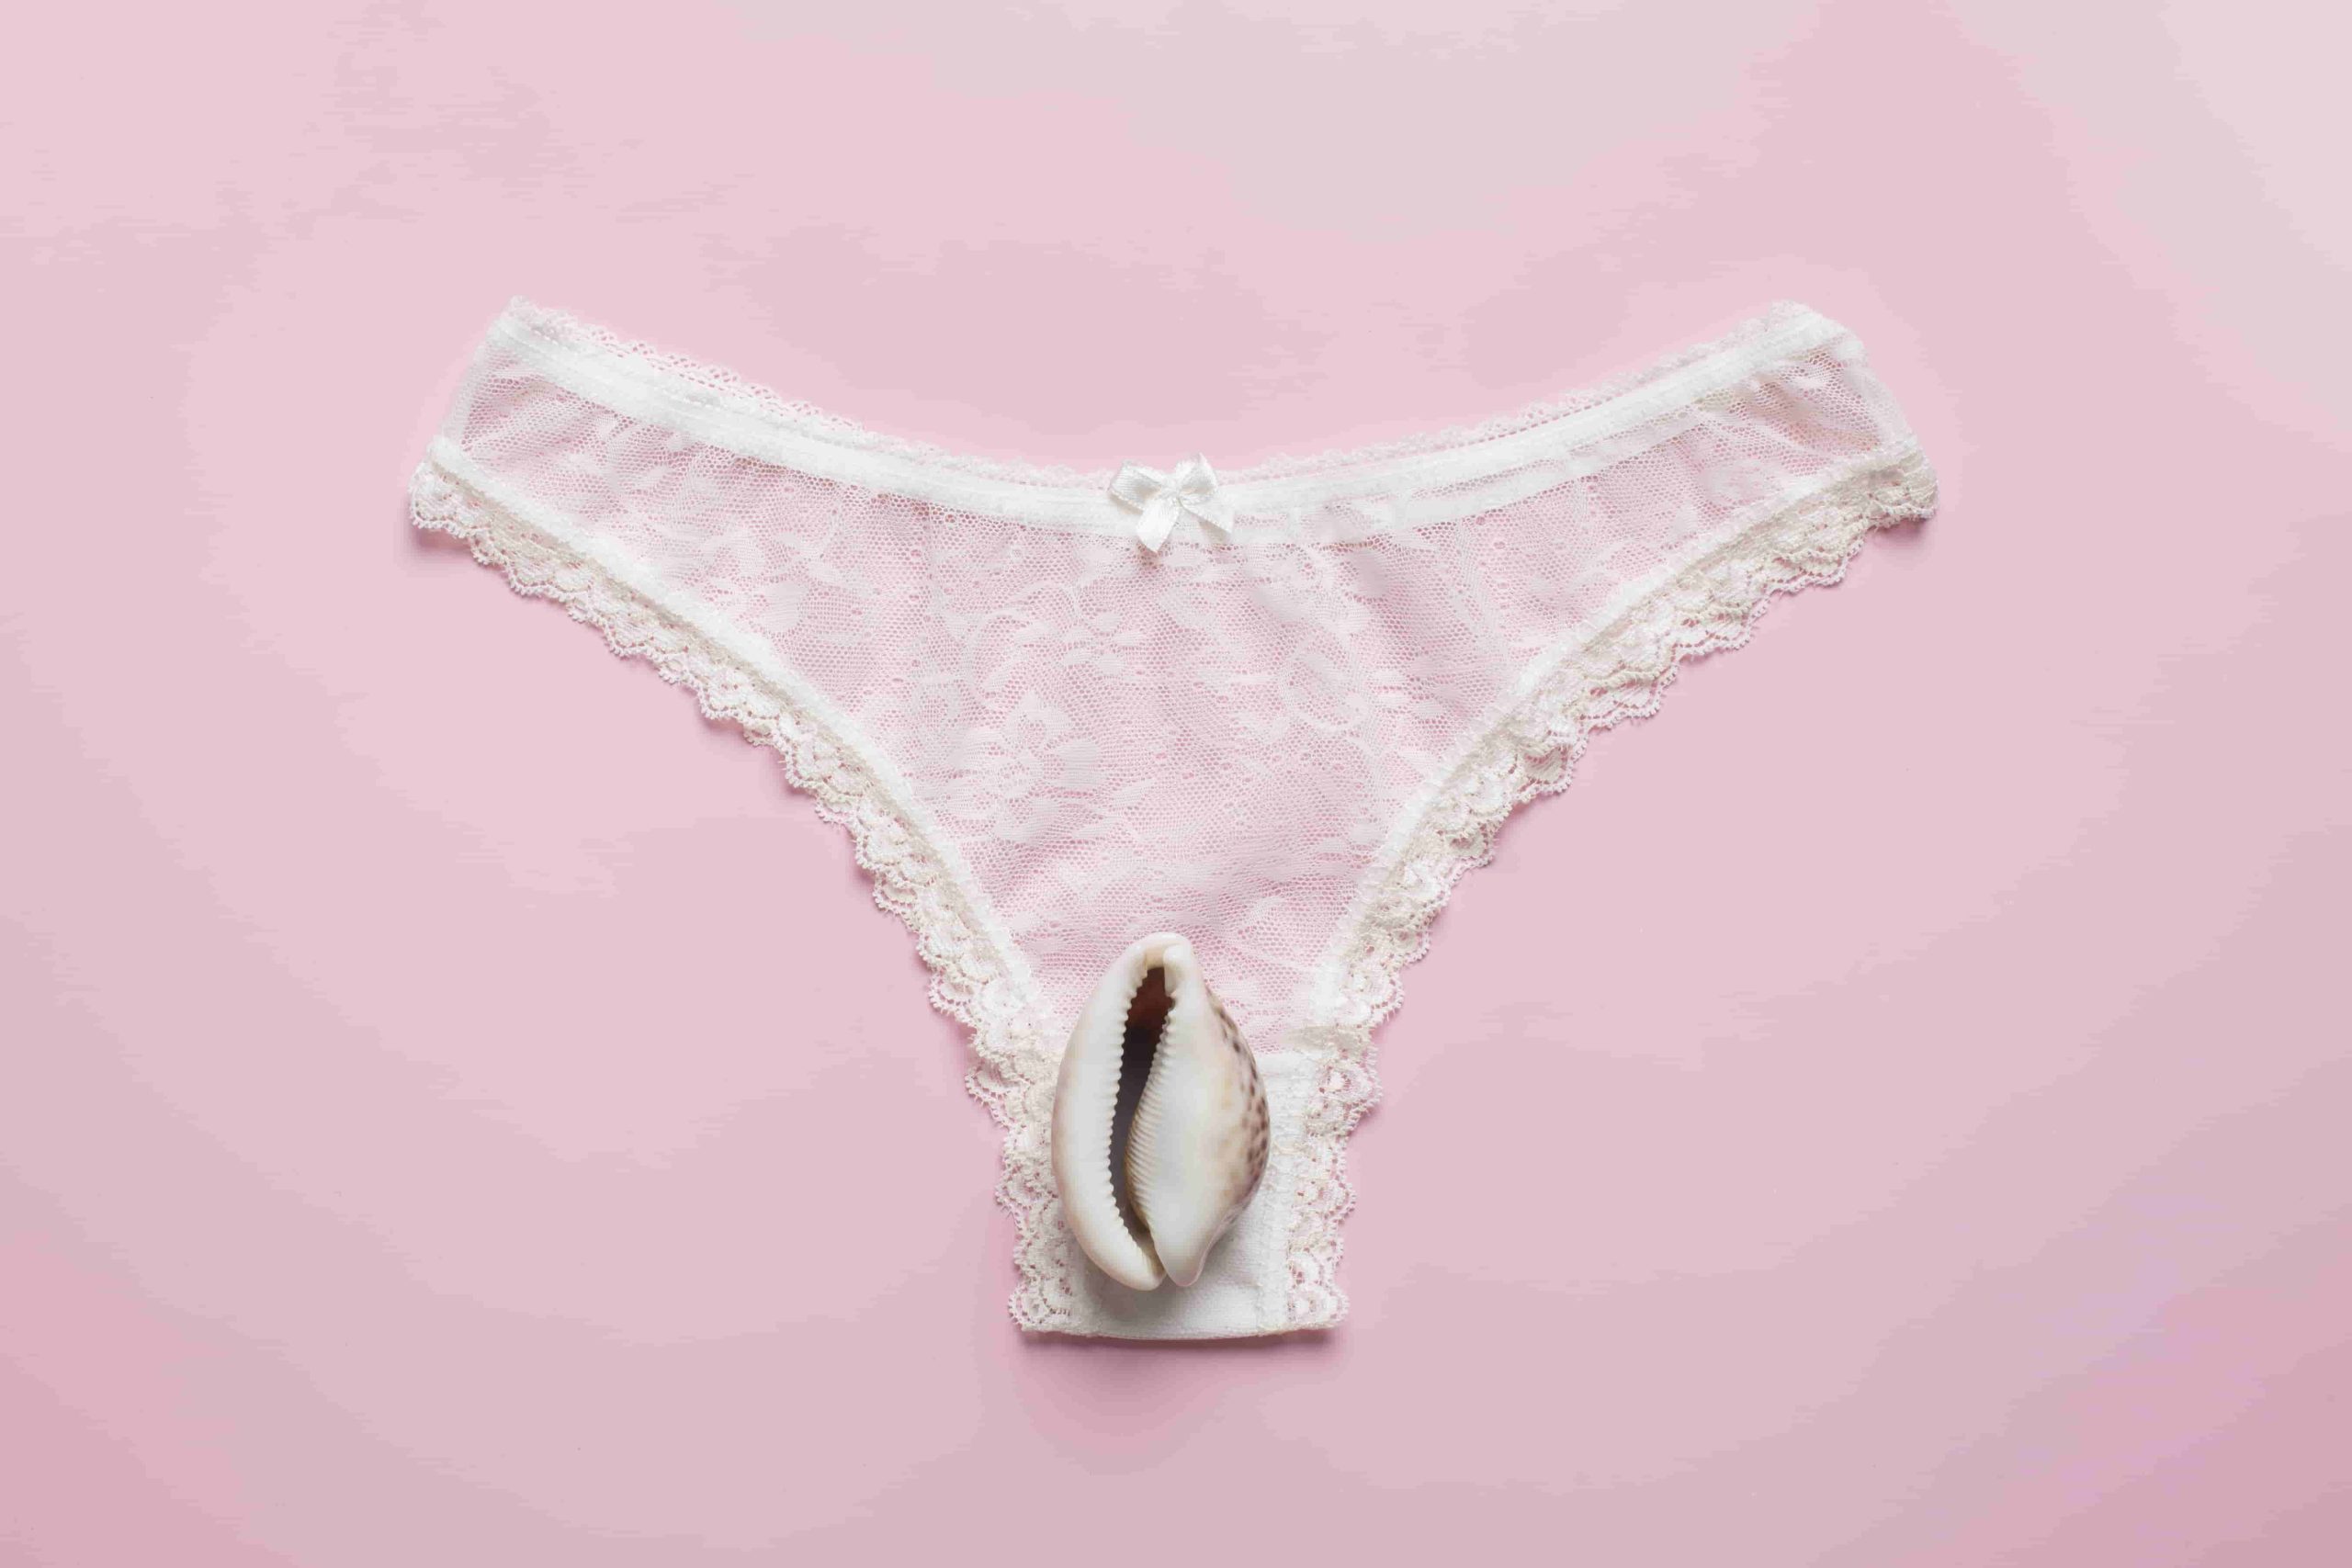 Why Your Vagina Leaves 'Bleach' Stains in Your Underwear